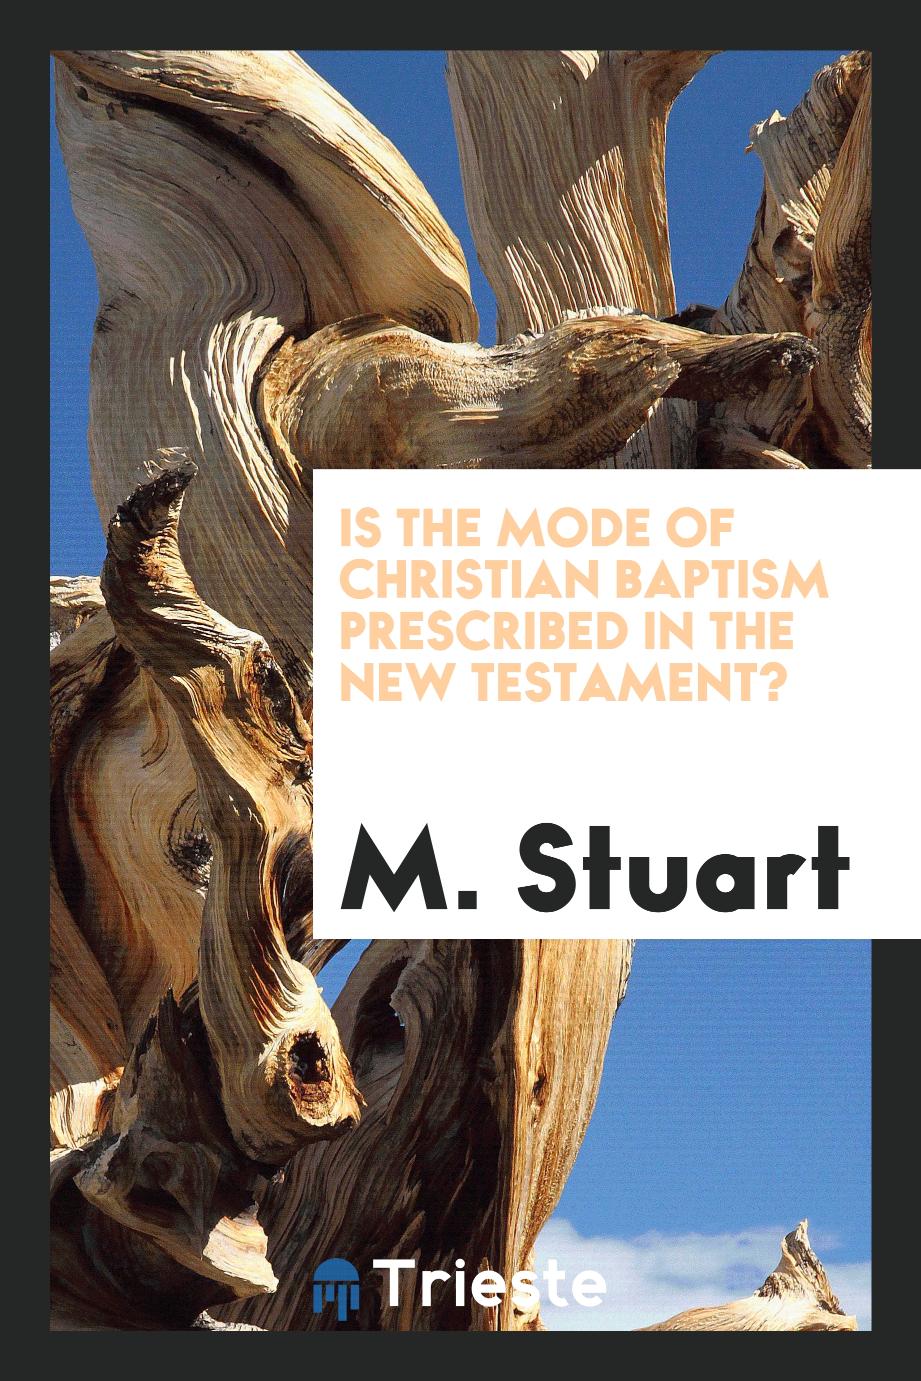 Is the mode of Christian baptism prescribed in the New Testament?